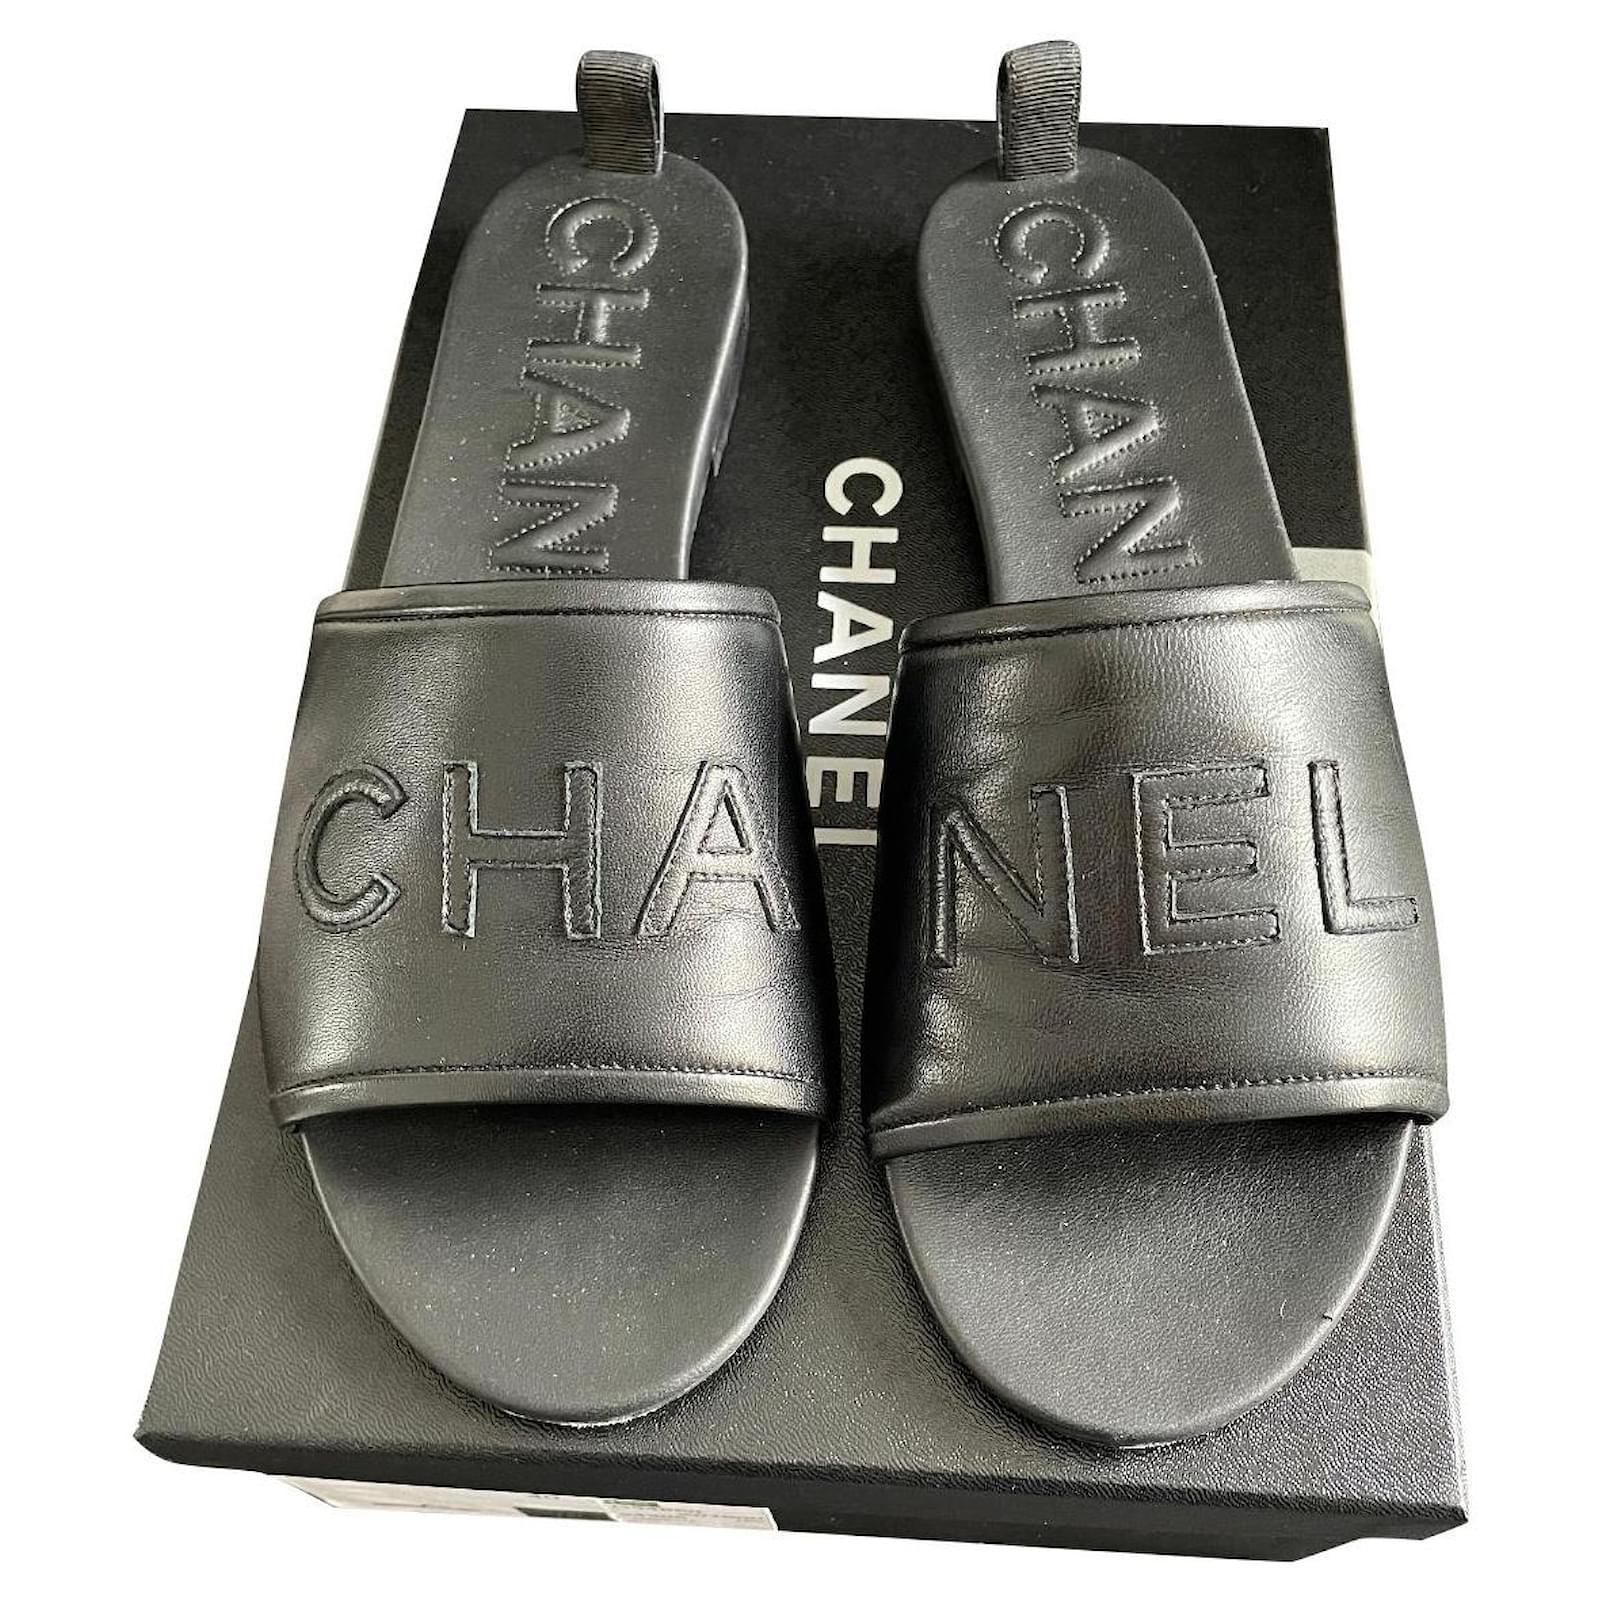 chanel black leather mules